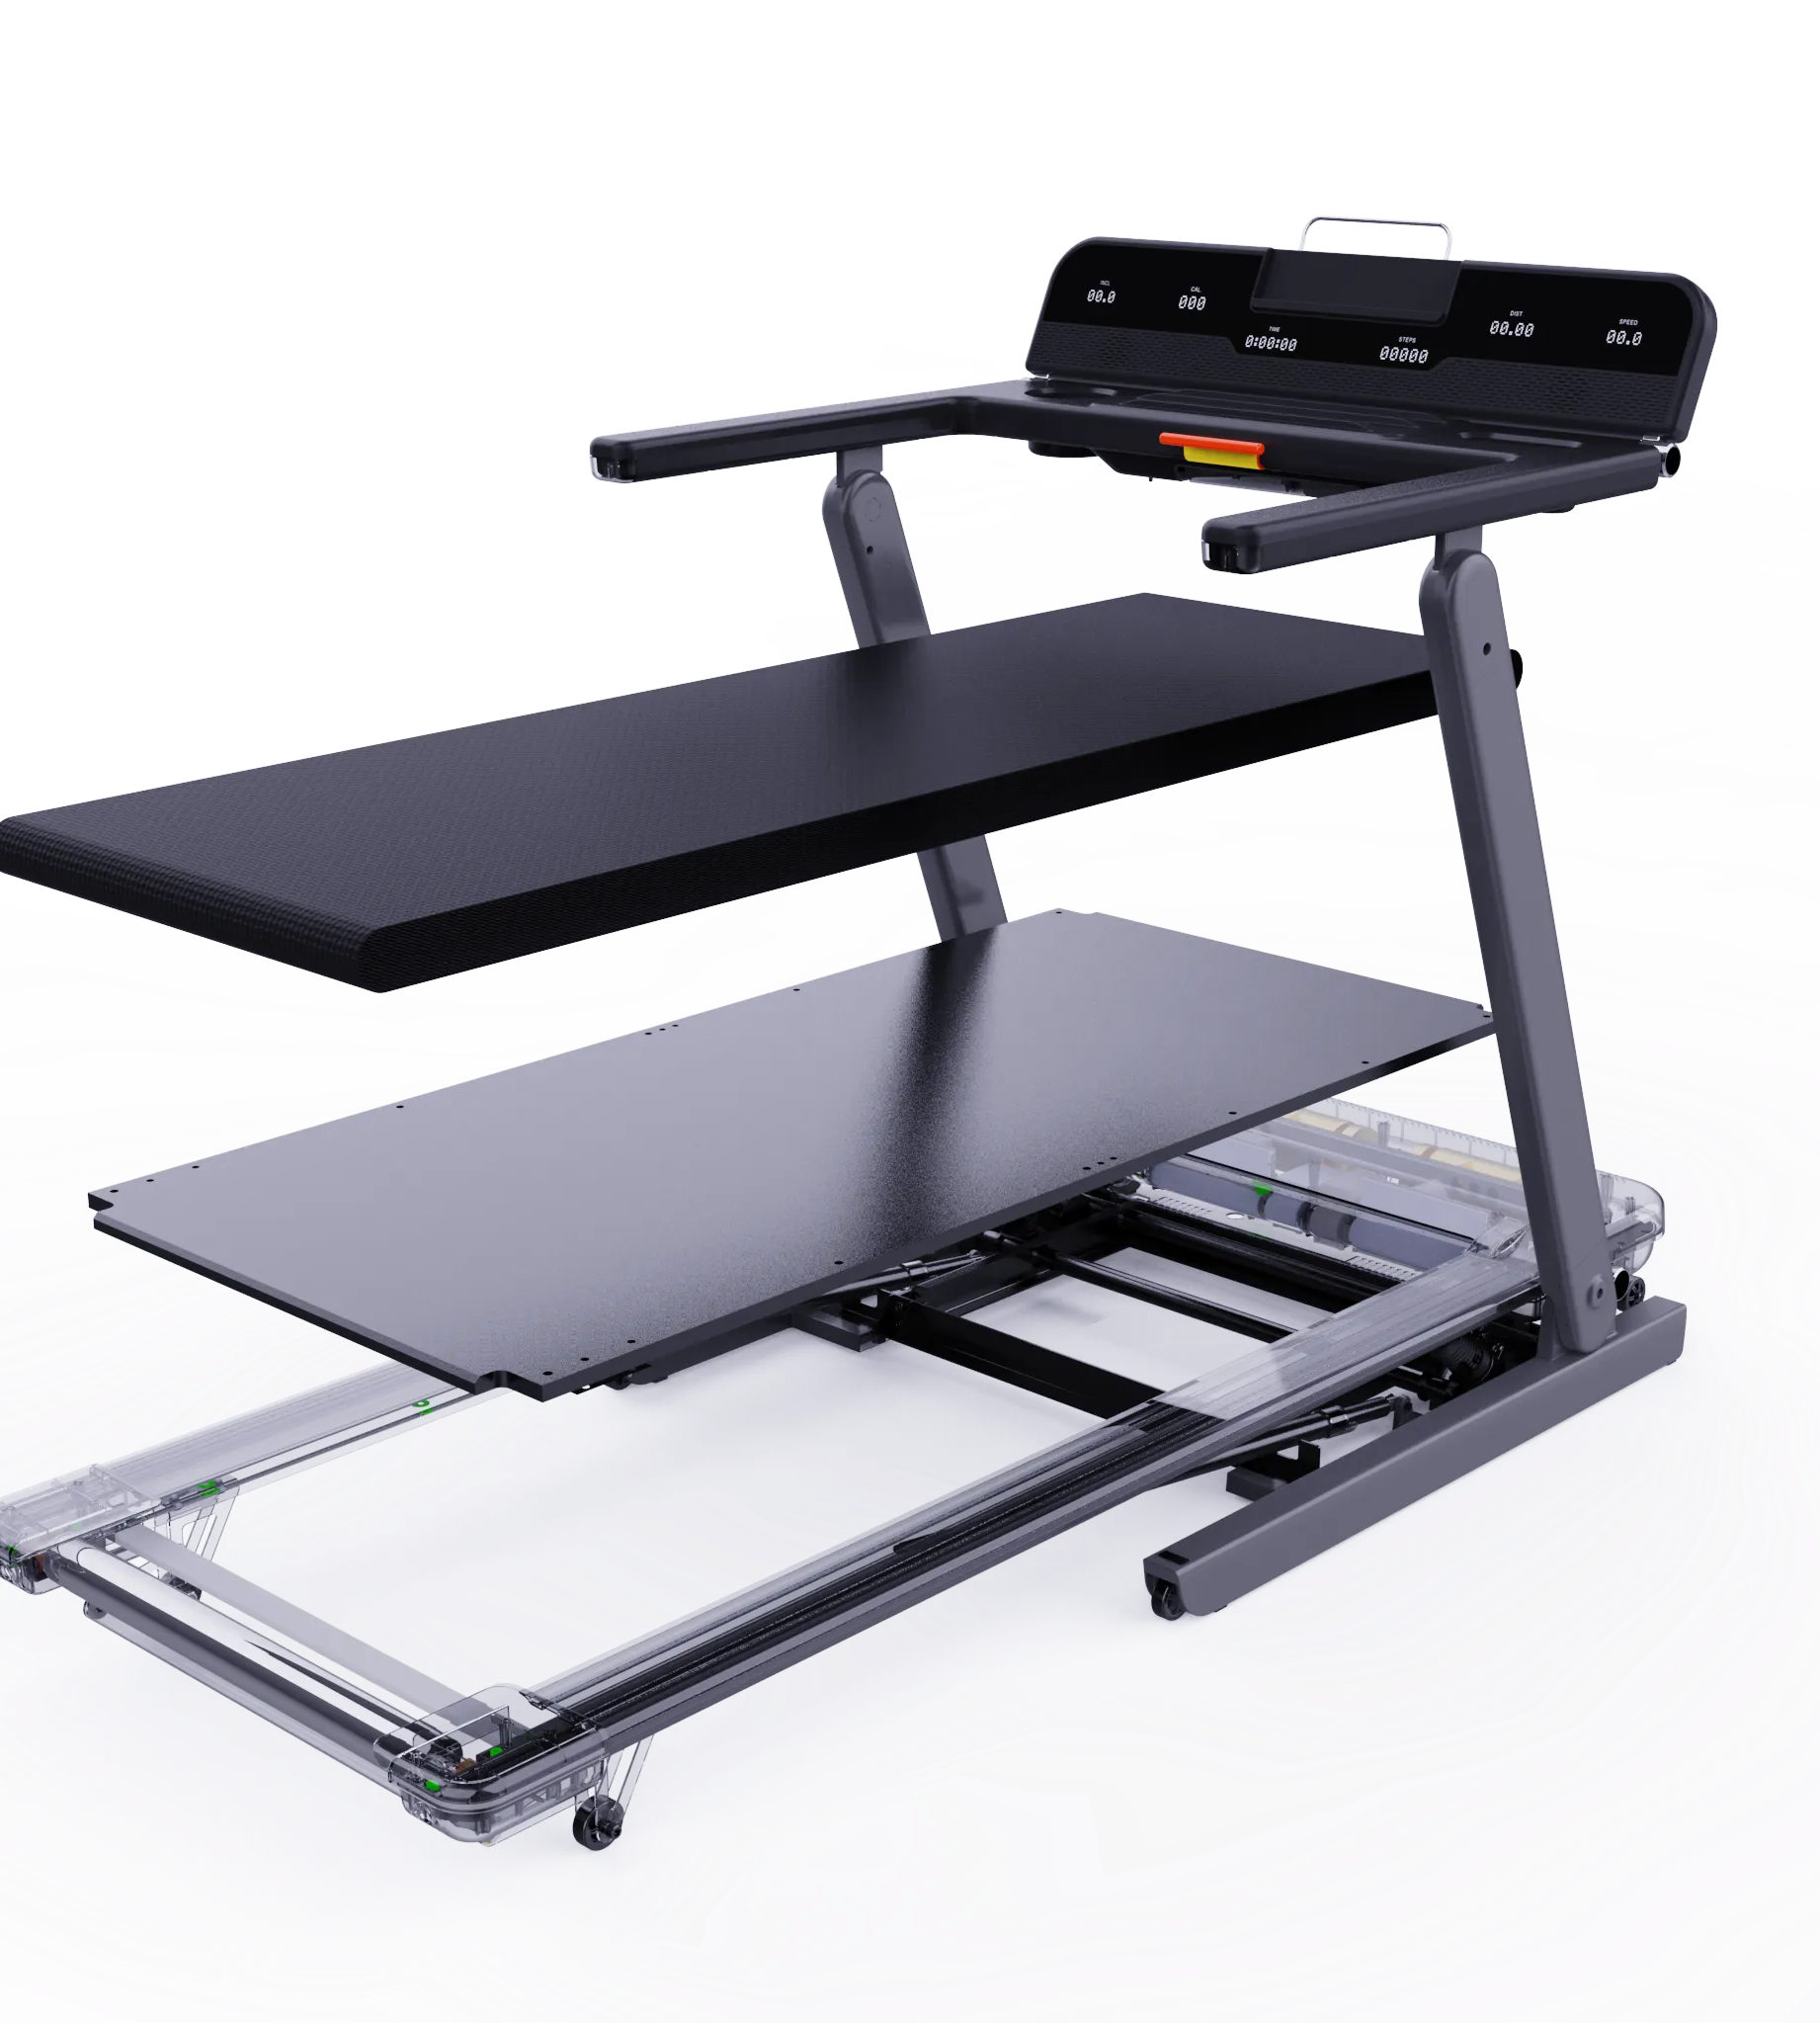 The Versatility of Renhe's Home Gym for All Fitness Enthusiasts